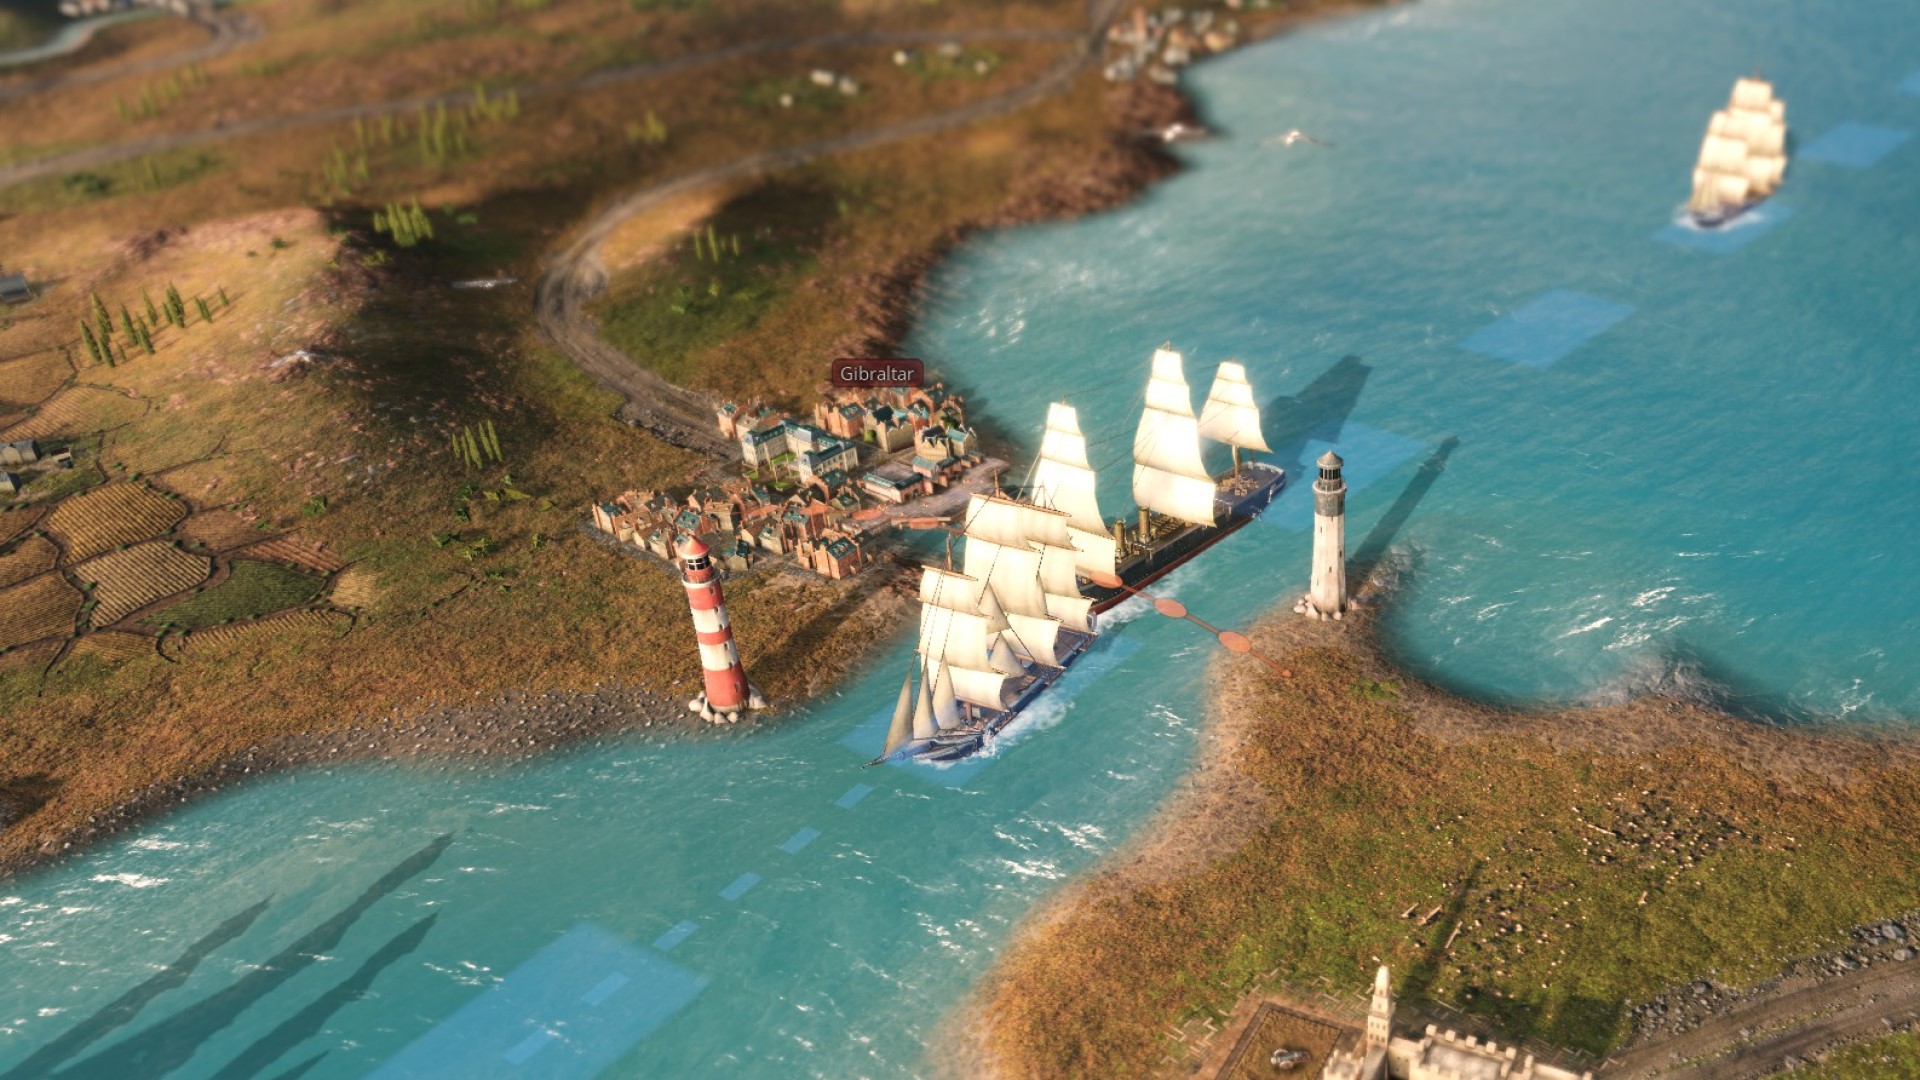 Victoria 3 trade guide: Sailing ships pass through the Panama Canal